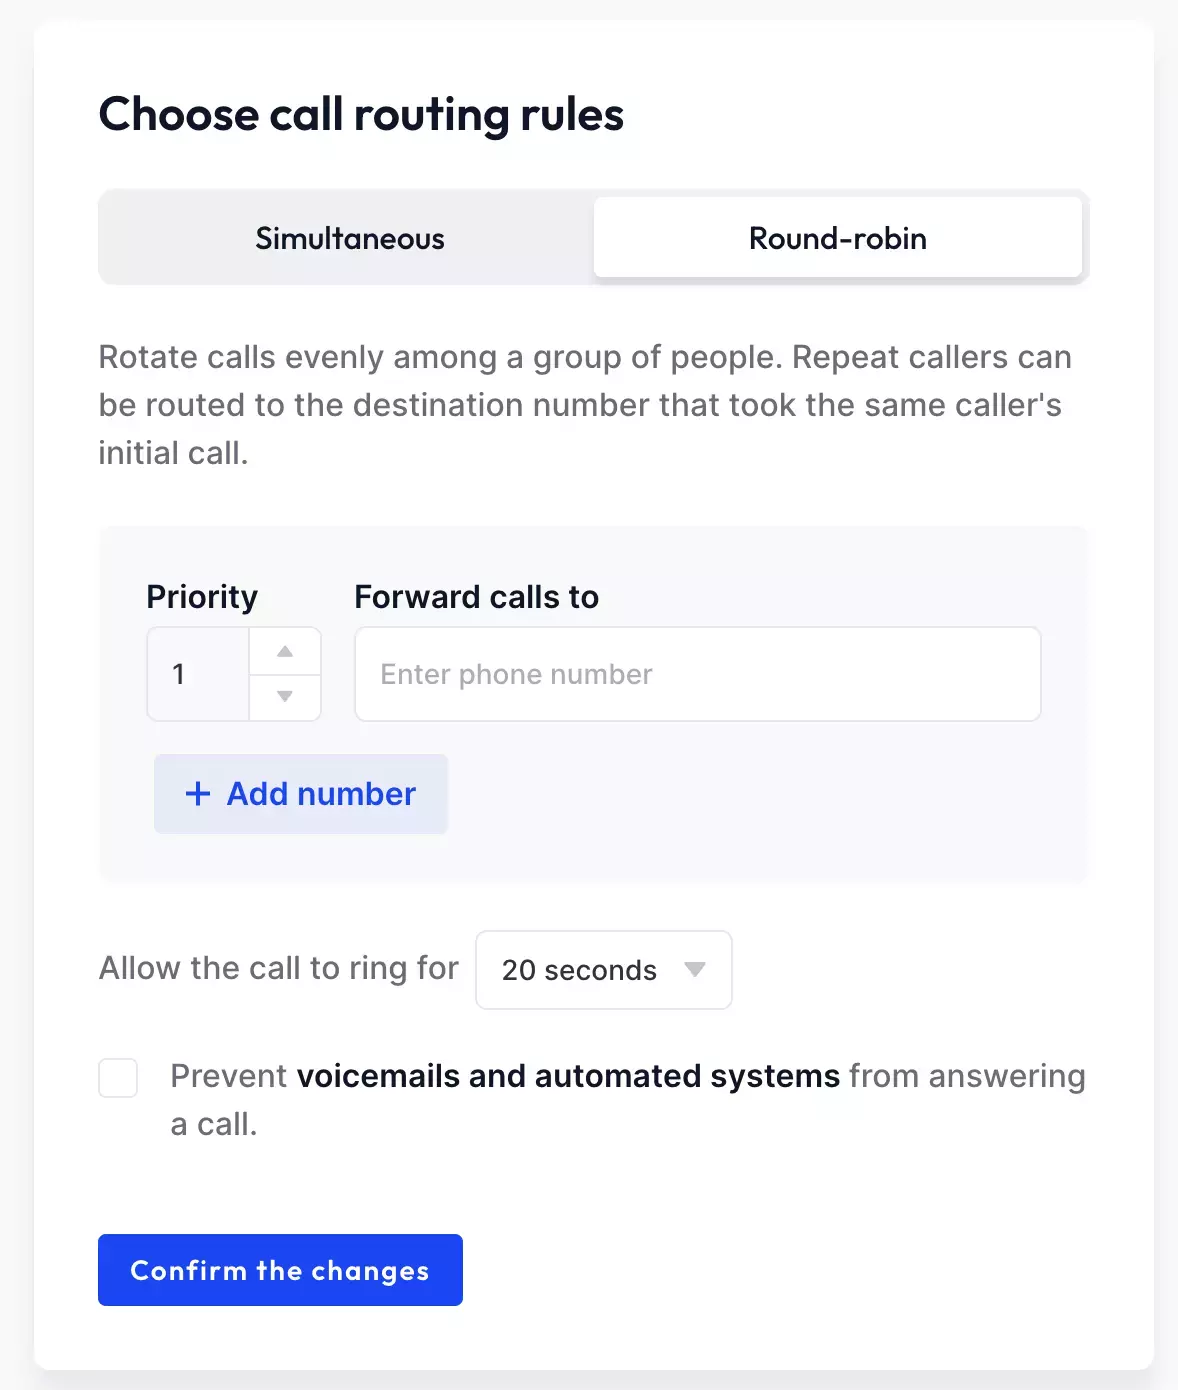 An image of Community Phone business landline round-robin call forwarding feature